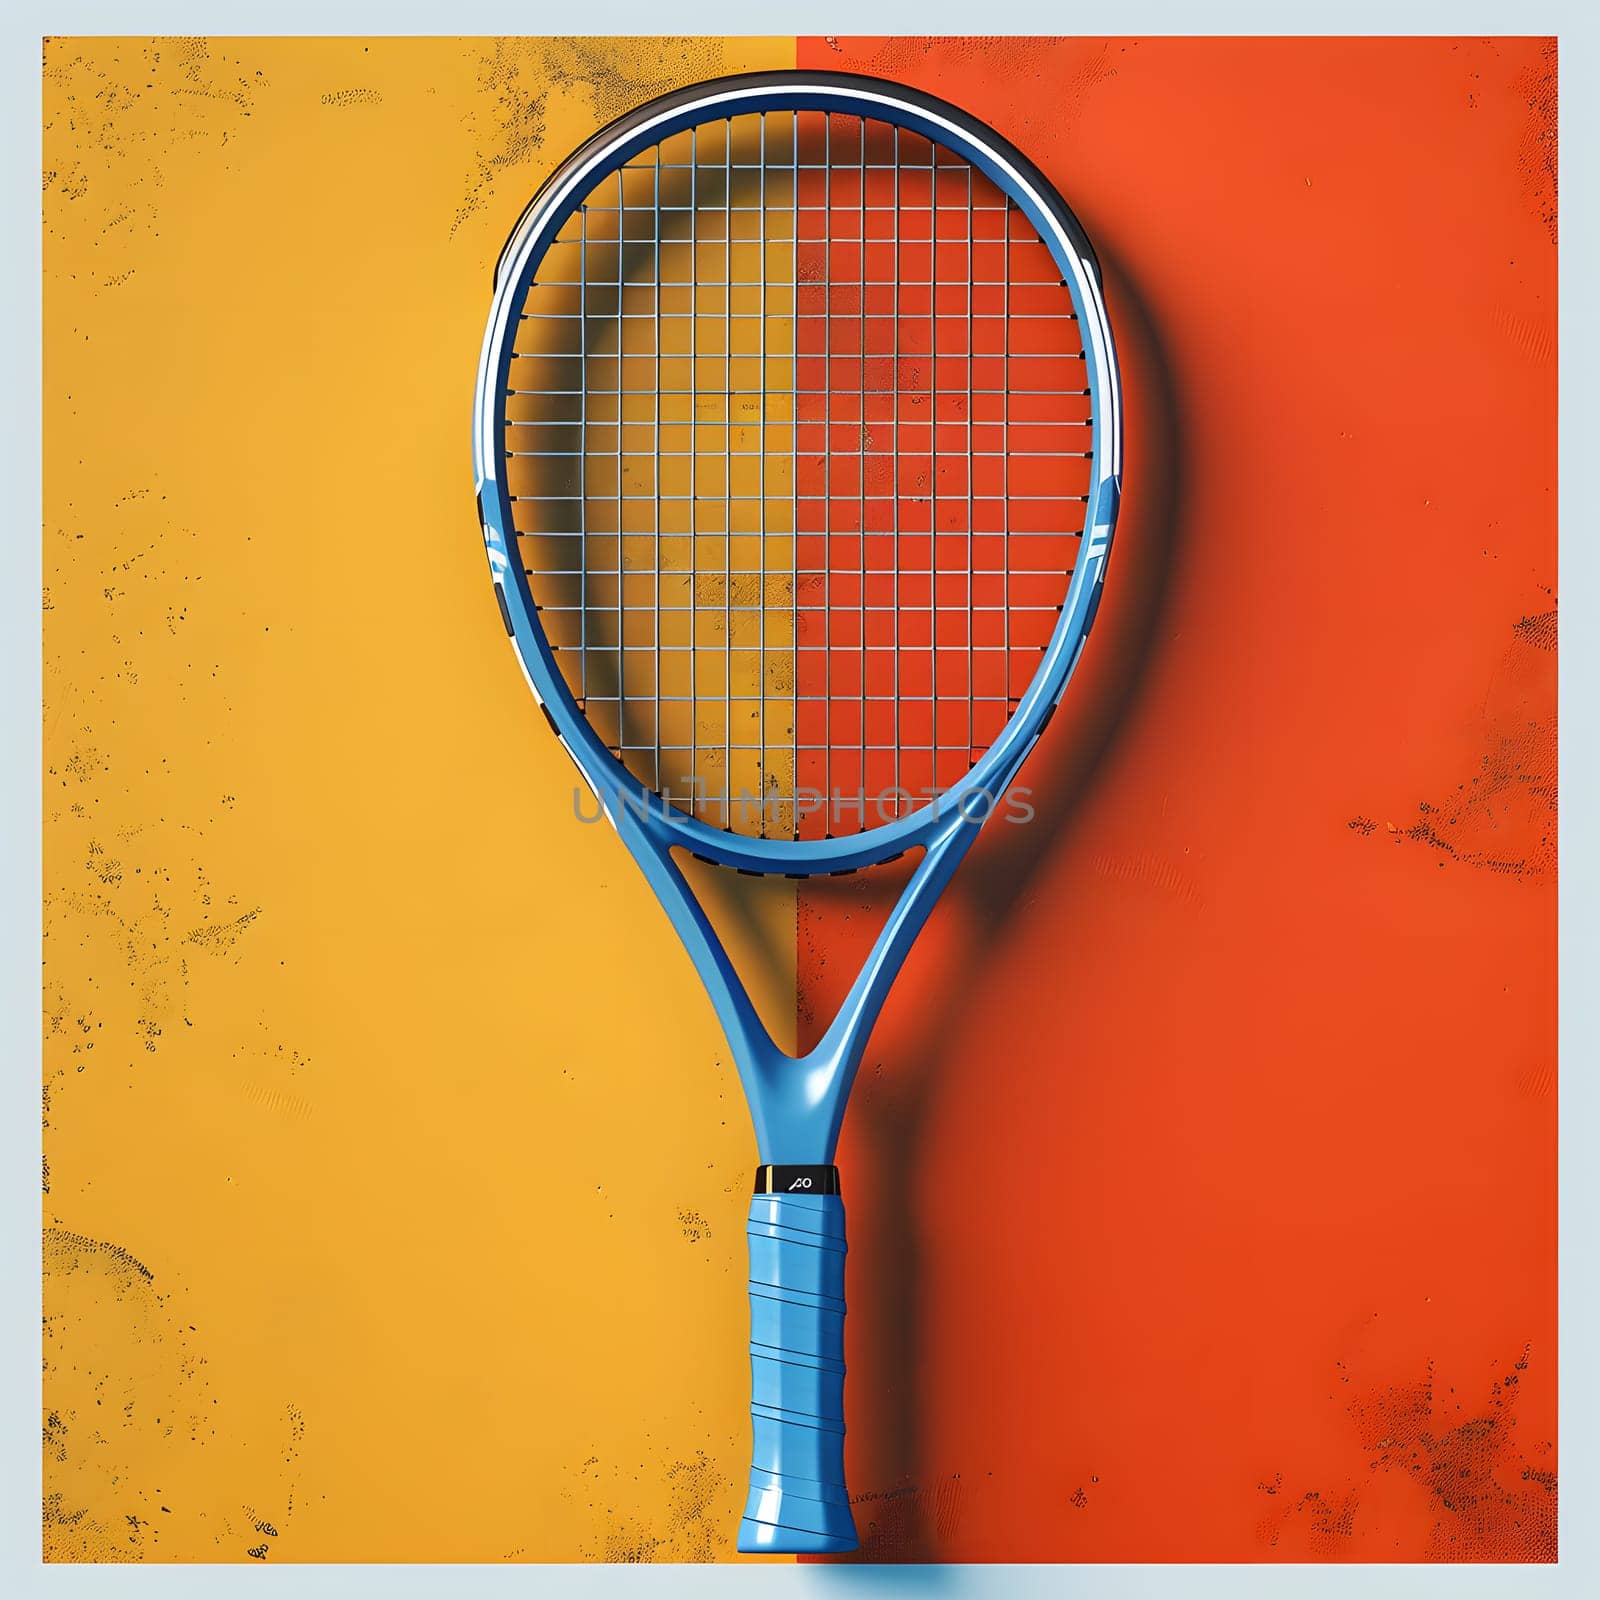 An electric blue tennis racket displayed on a vibrant red and yellow background. The artwork features symmetry and uses tints and shades to create a captivating design